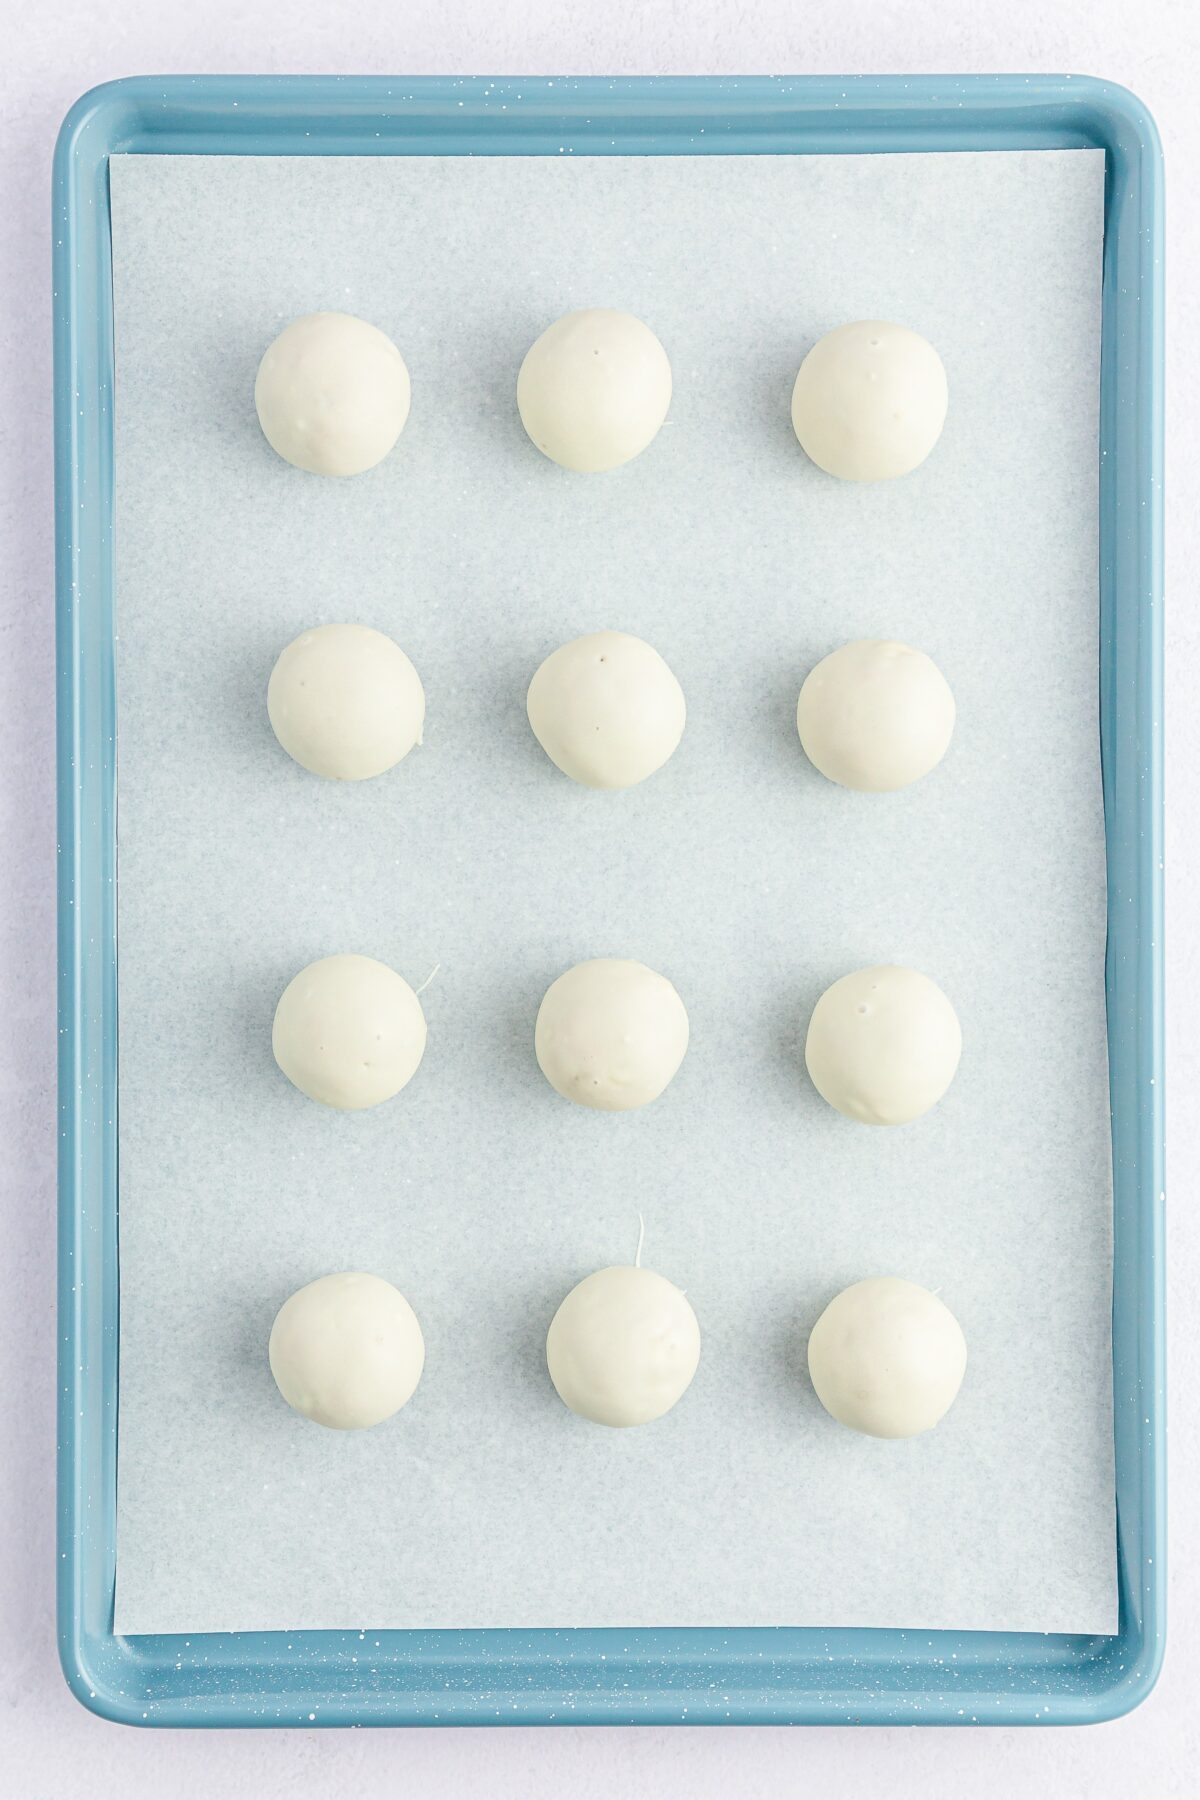 Chocolate coated carrot cake balls on a baking sheet.